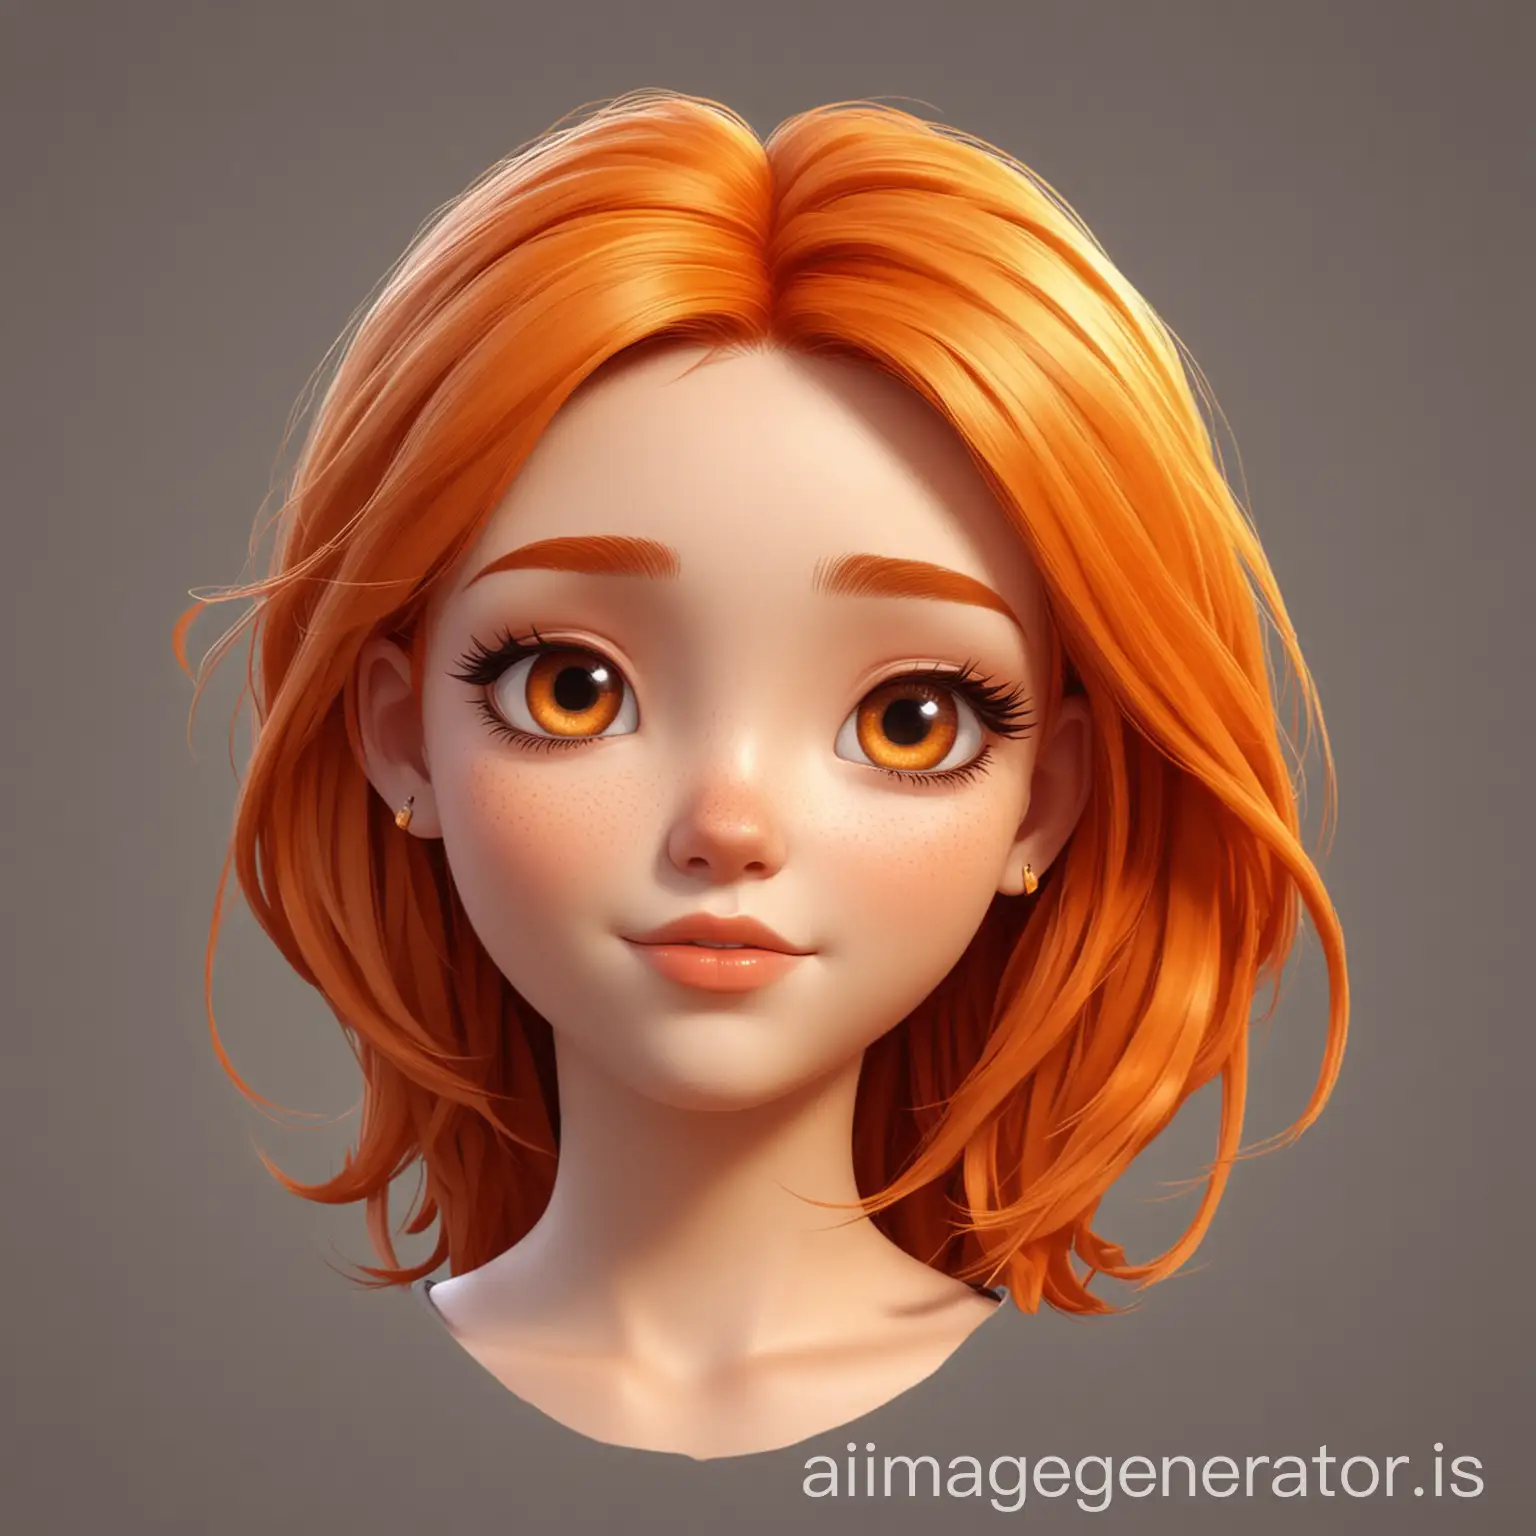 Cartoon-Avatar-of-a-Girl-with-Orange-Hair-Against-Crescent-Background